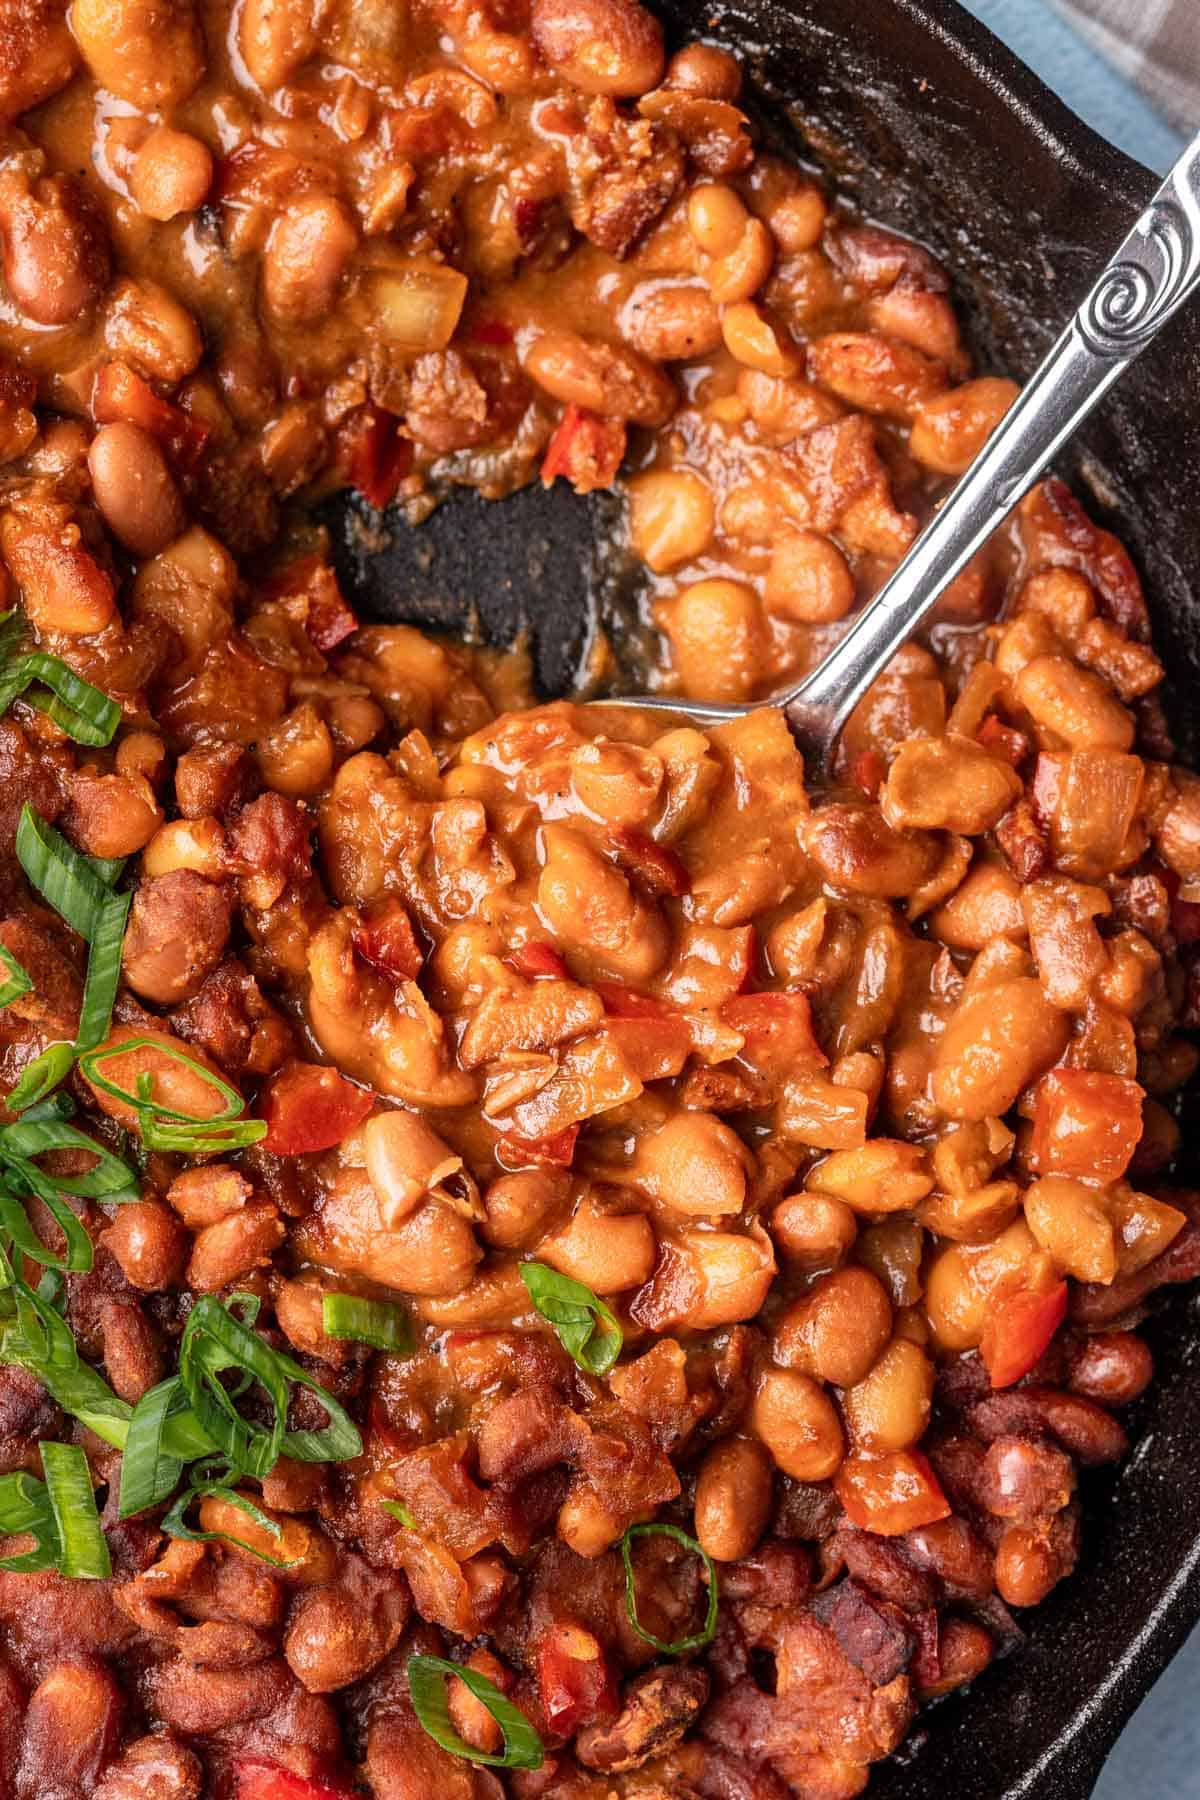 Smoked baked beans scooped with a serving spoon.